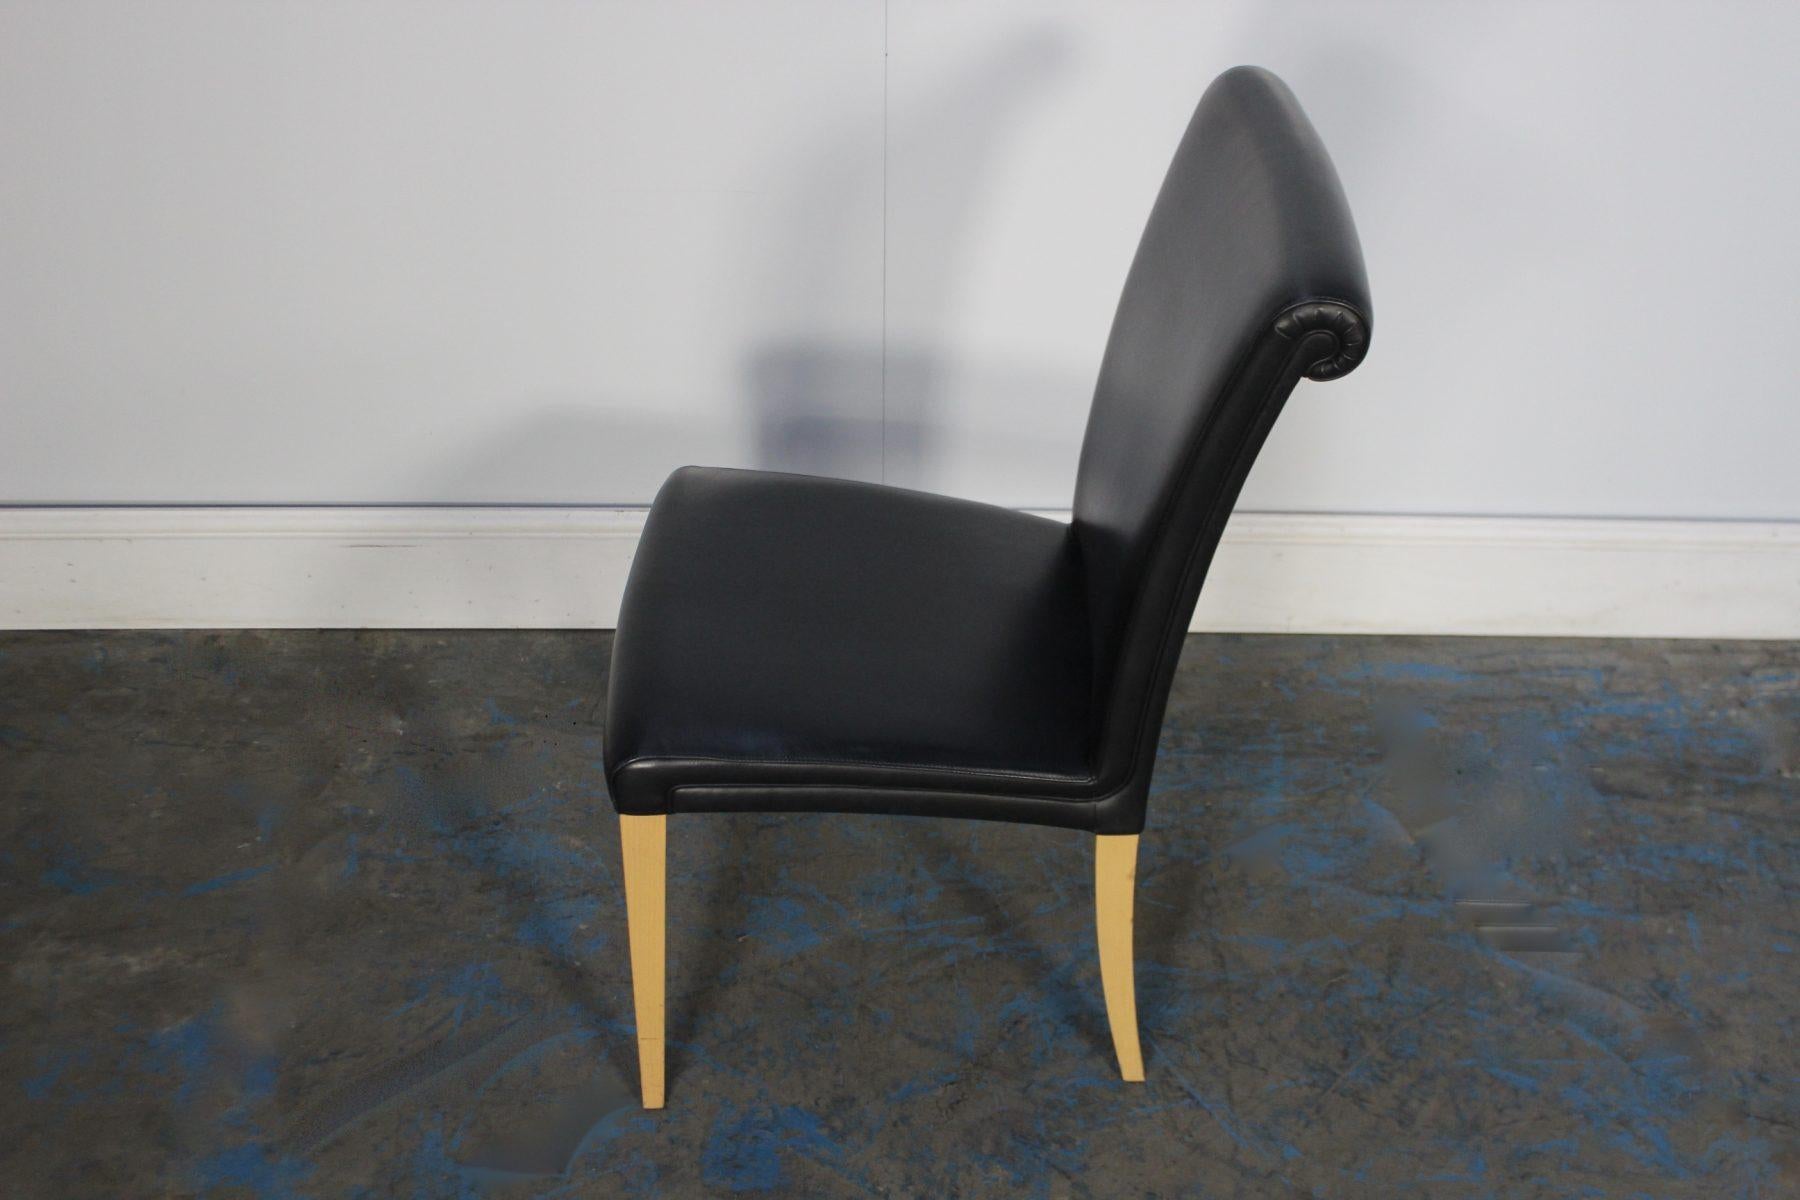 Superb Suite of 12 Poltrona Frau “Vittoria” Dining Chairs in Black “Pelle Frau” For Sale 3